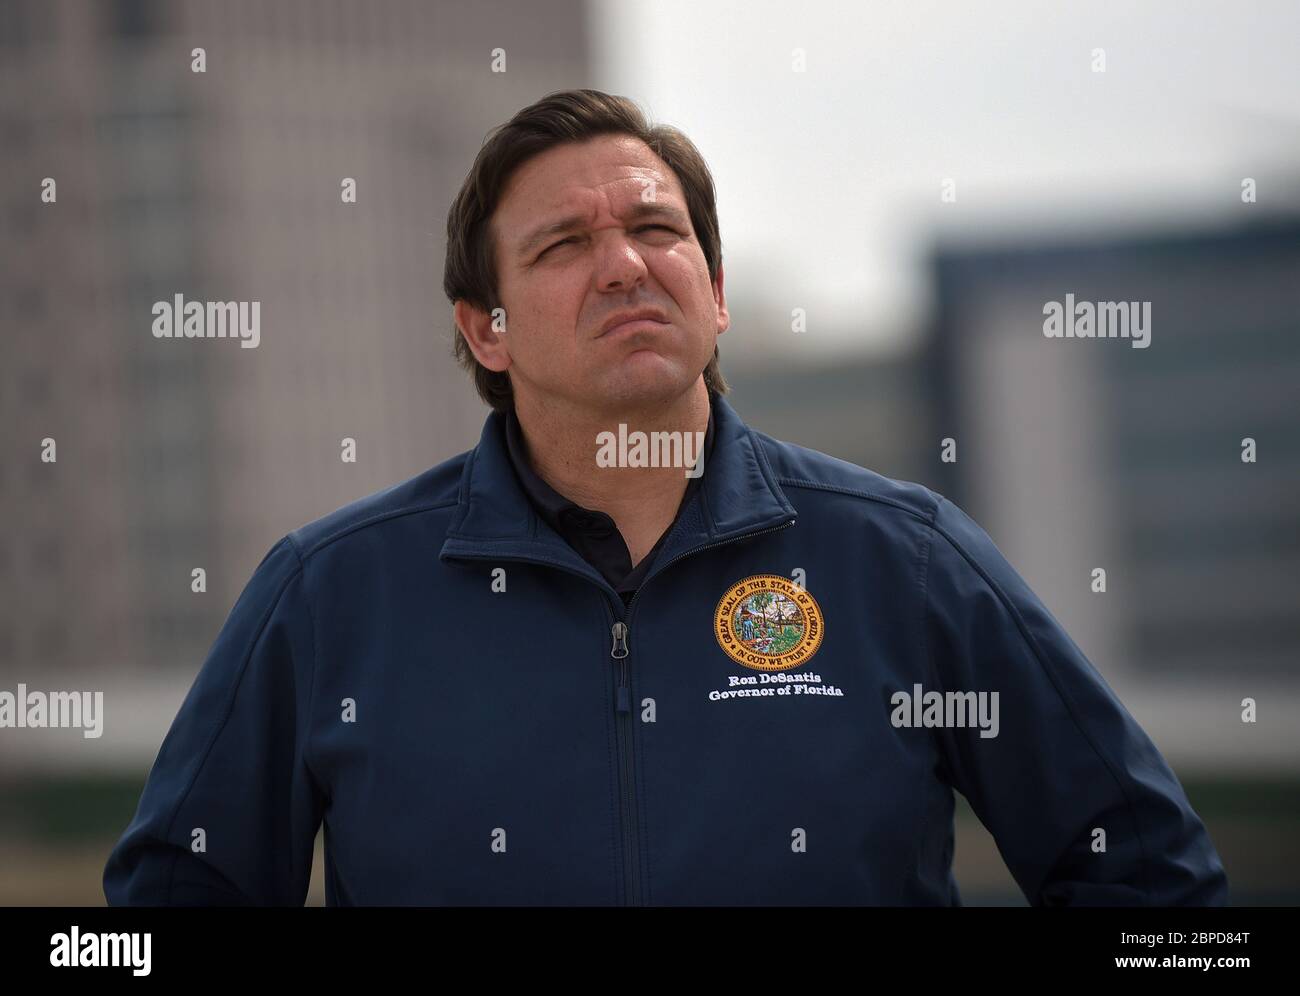 May 18, 2020 - Orlando, Florida, United States - Florida Gov. Ron DeSantis looks on at a news conference on May 18, 2020 at the newly completed I-4 and State Road 408 interchange which will open to traffic tonight in downtown Orlando, Florida. DeSantis explained that progress on the 21-mile I-4 Ultimate Project was expedited at his direction due to the decrease in traffic during the coronavirus crisis. (Paul Hennessy/Alamy) Stock Photo